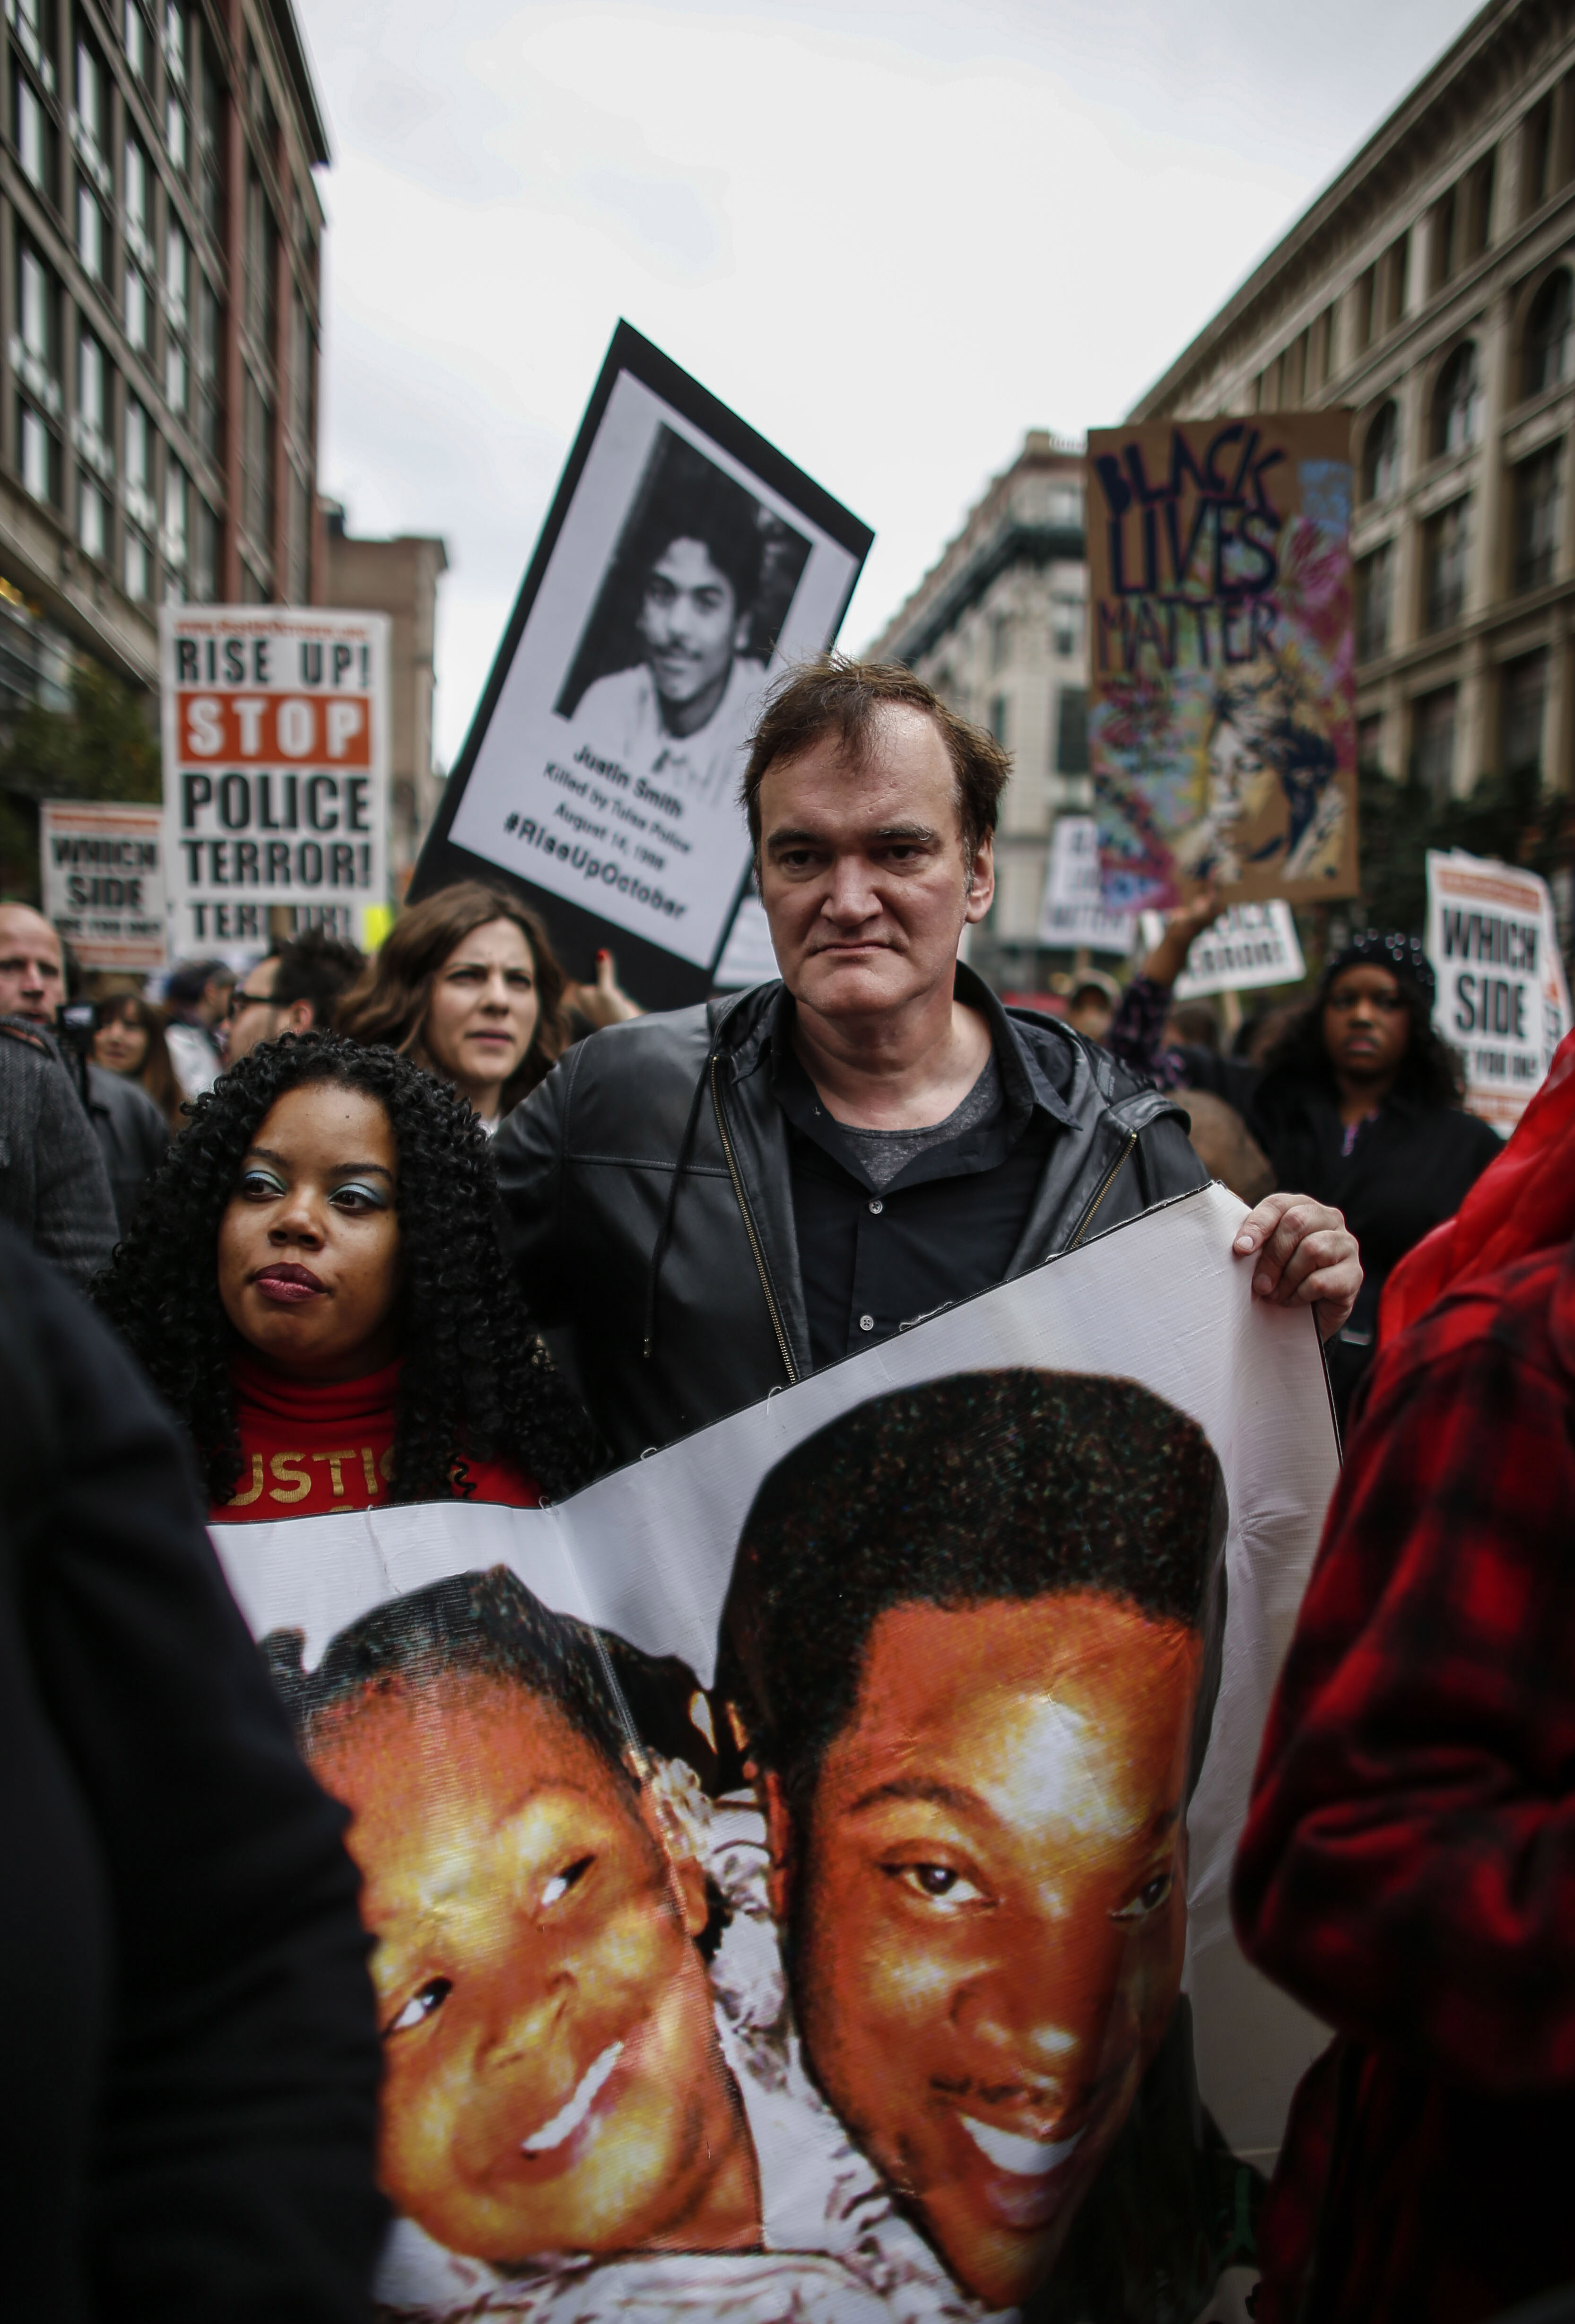 Director Quentin Tarantino attends a march to denounce police brutality in Washington Square Park October 24, 2015 in New York City. (Kena Betancur--Getty Images) (Kena Betancur&mdash;Getty Images)